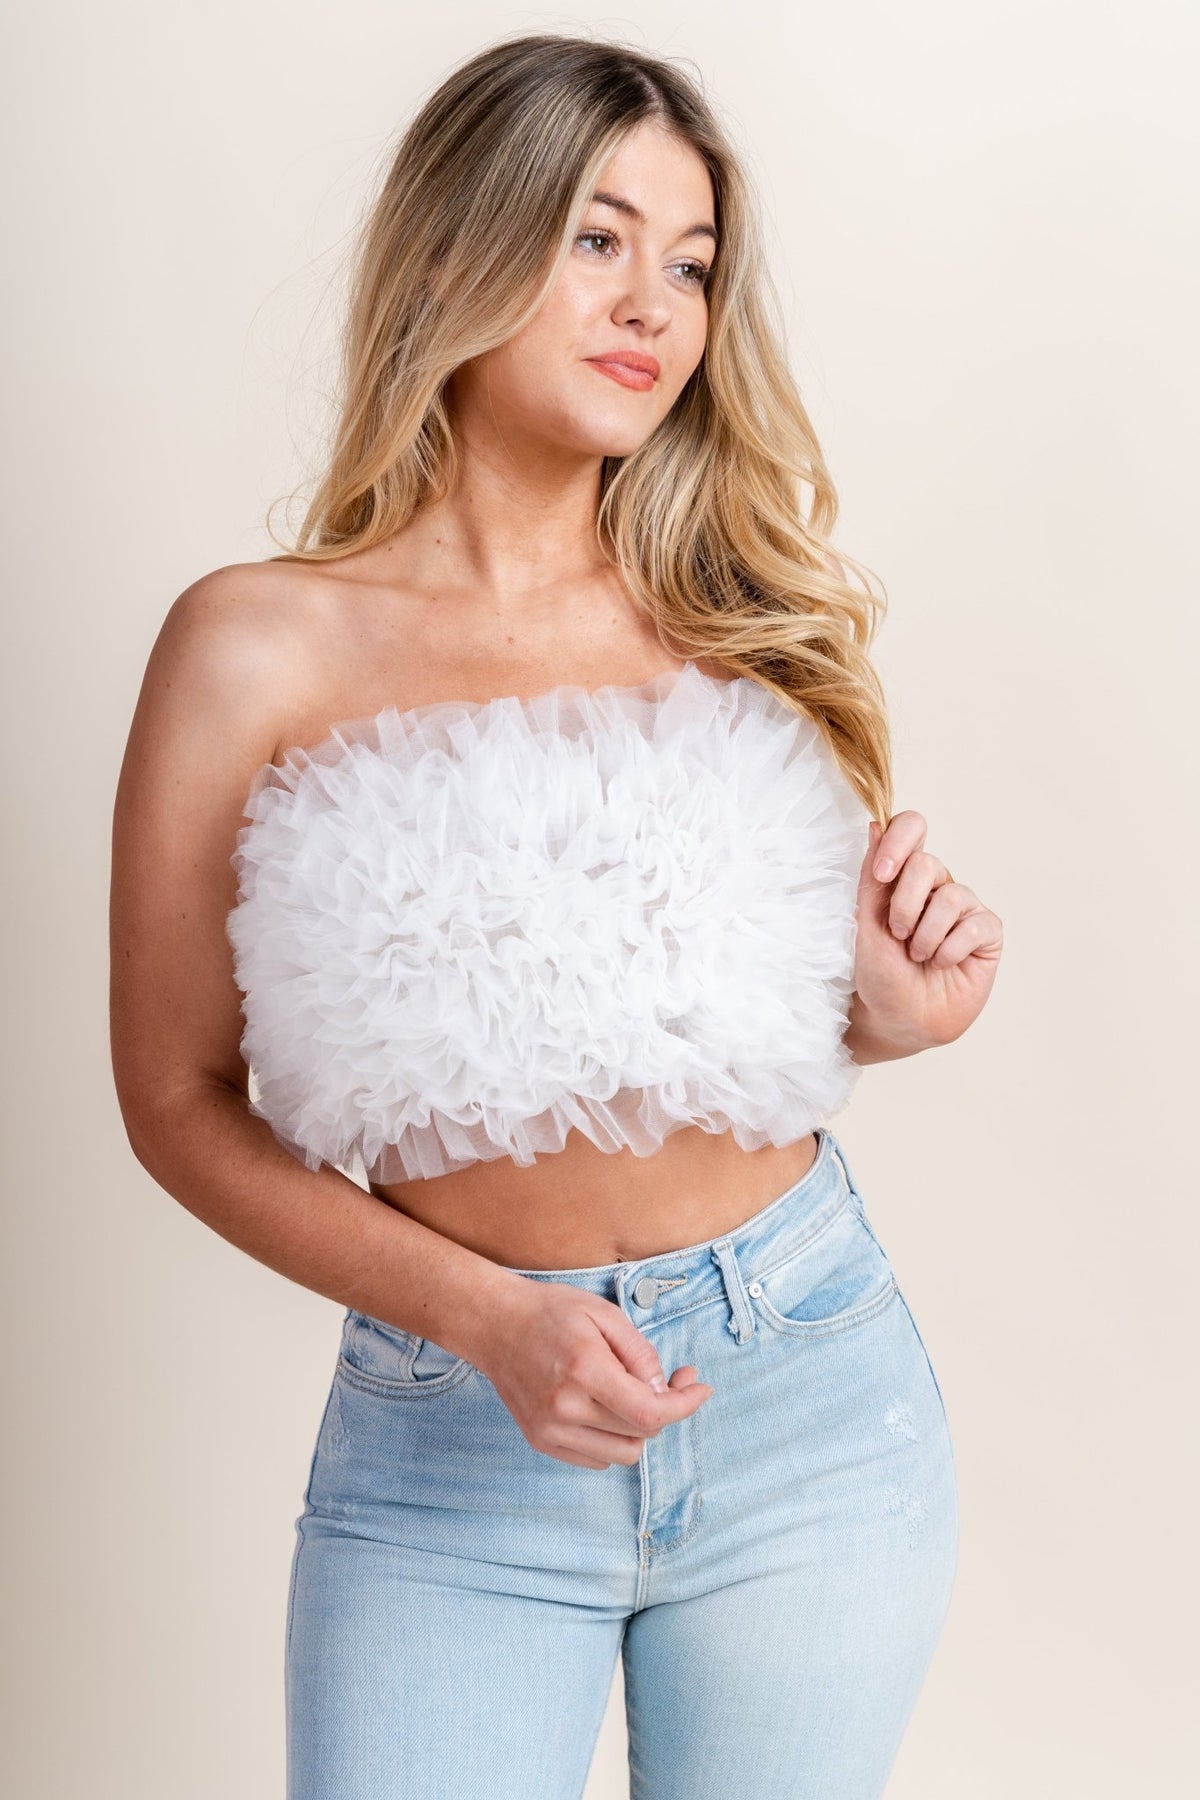 Strapless tulle top off white - Stylish Top -  Cute Bridal Collection at Lush Fashion Lounge Boutique in Oklahoma City